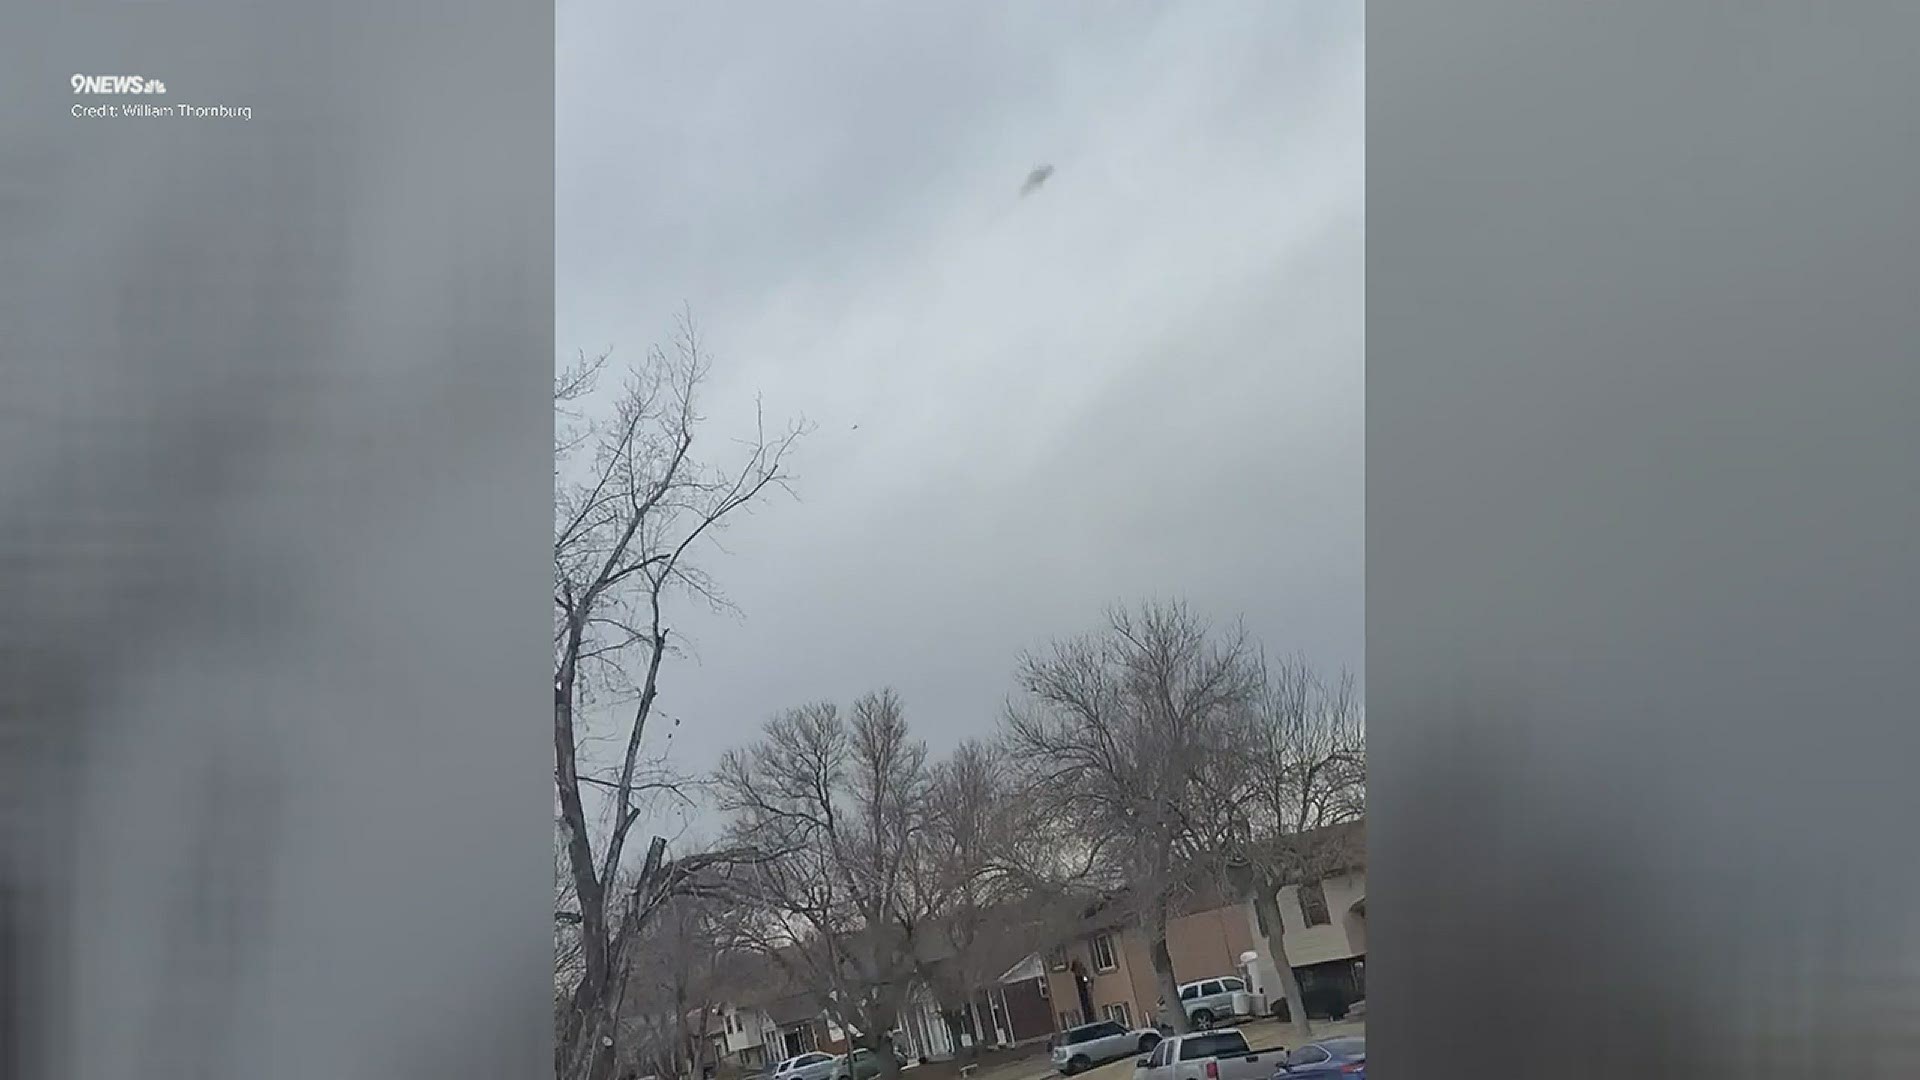 Watch this footage from 9NEWS viewer William Thornburg's, as he describes a plane flying overhead and then a ball of smoke followed by a trail of smoke.